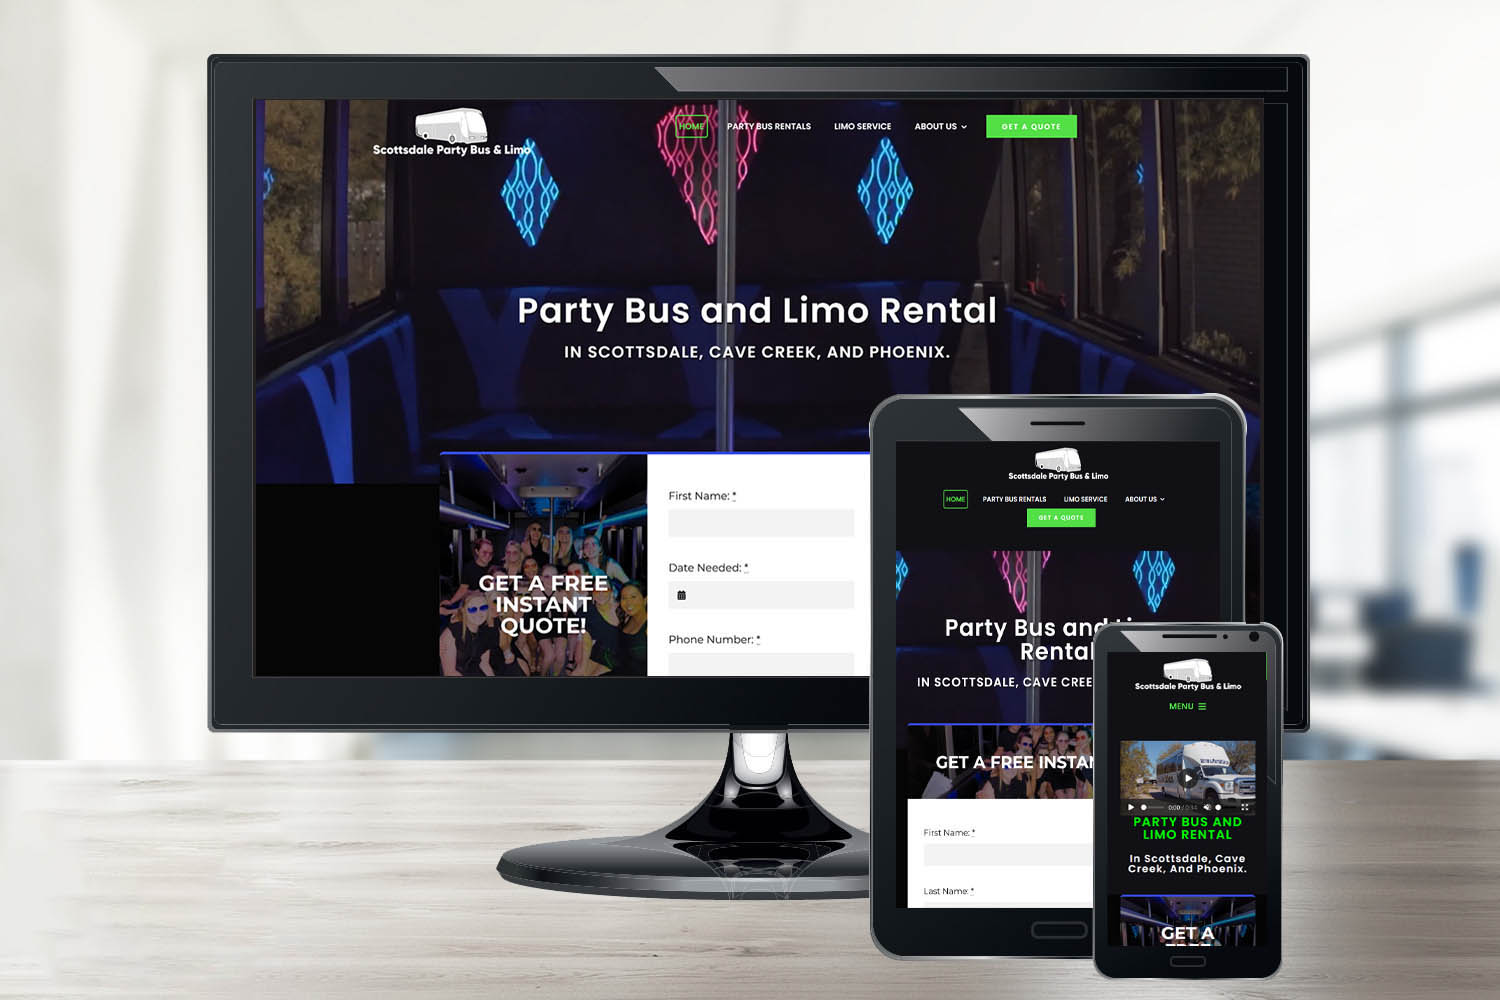 Scottsdale Party Bus and Limo's website shown on multiple devices